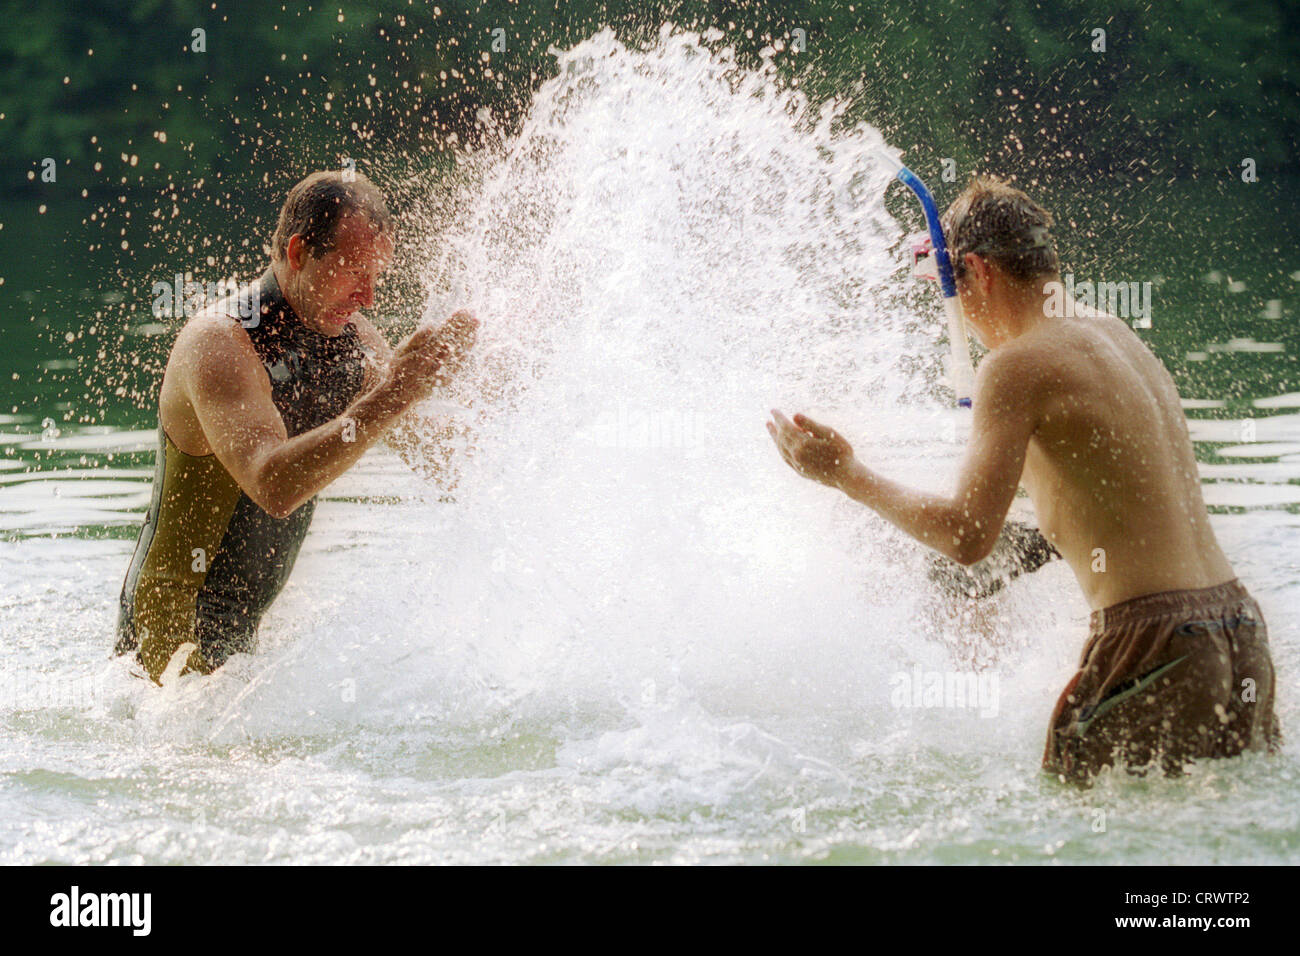 two men spray themselves with water Stock Photo